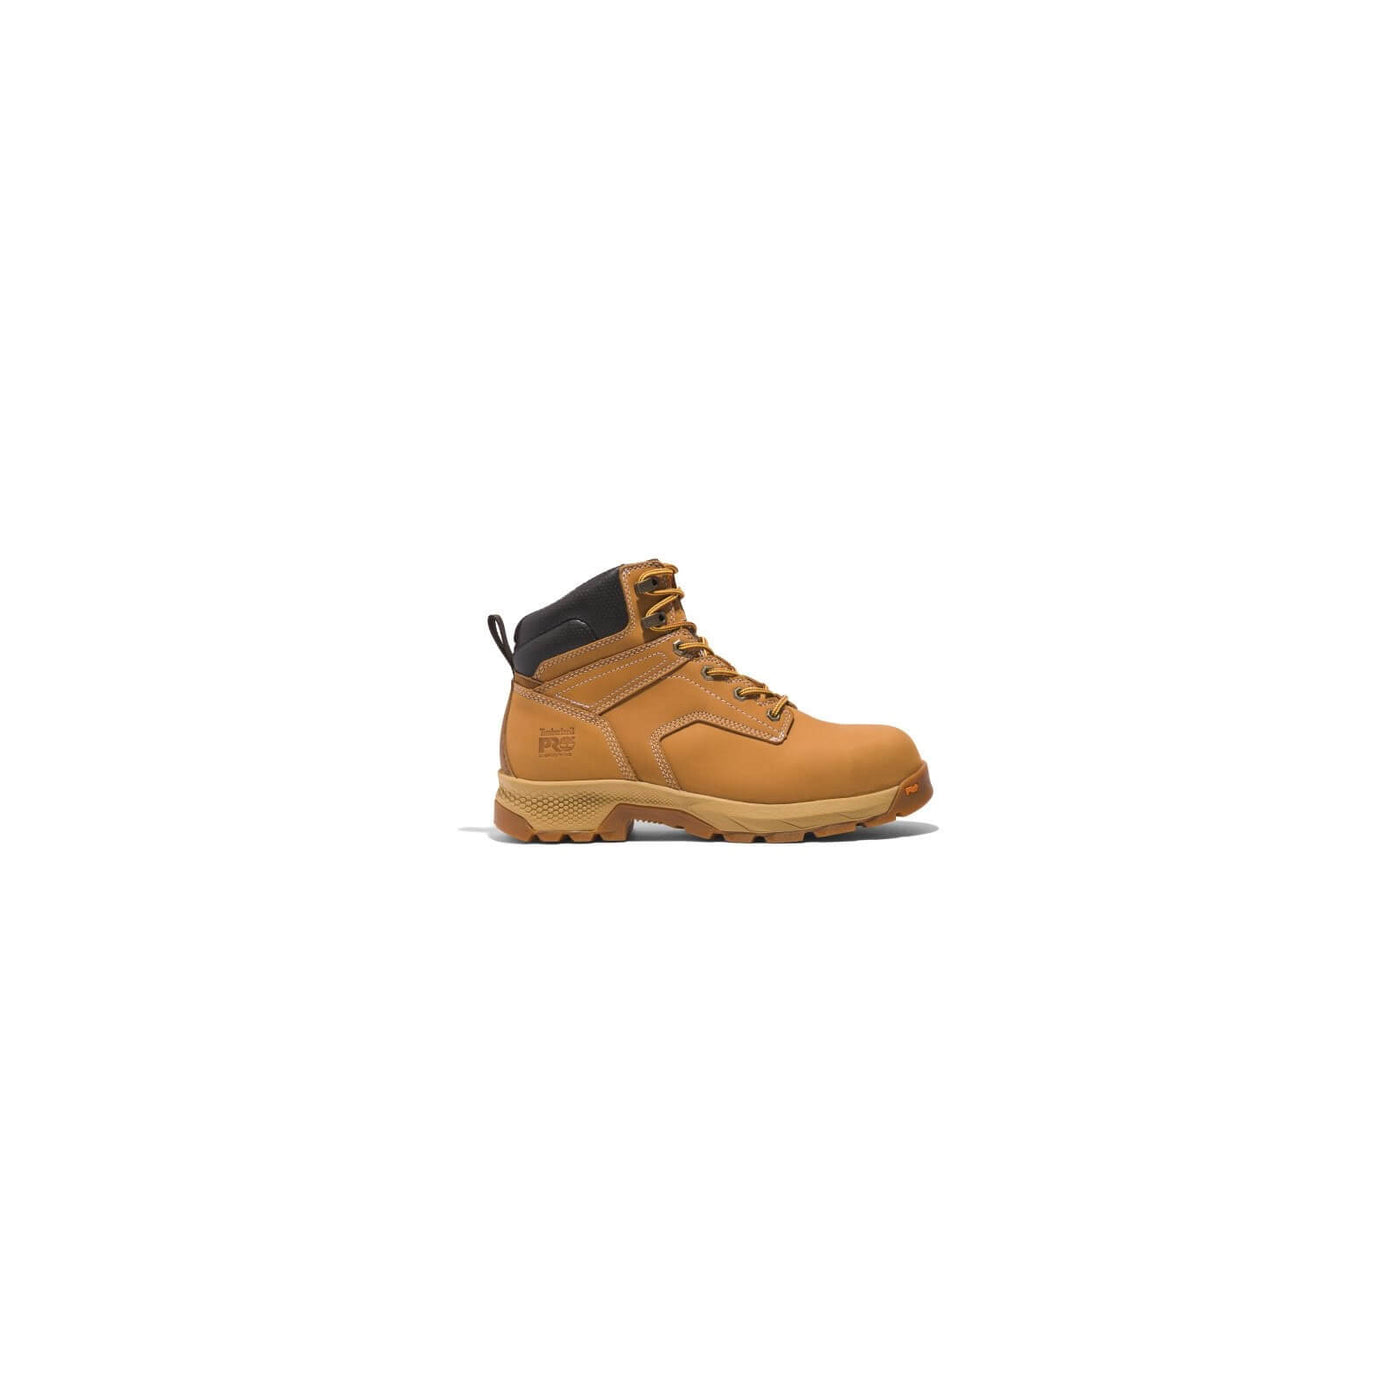 Timberland Pro Titan 6 Inch Lightweight Waterproof S3 Safety Boots Wheat Light Brown 7#colour_wheat-light-brown